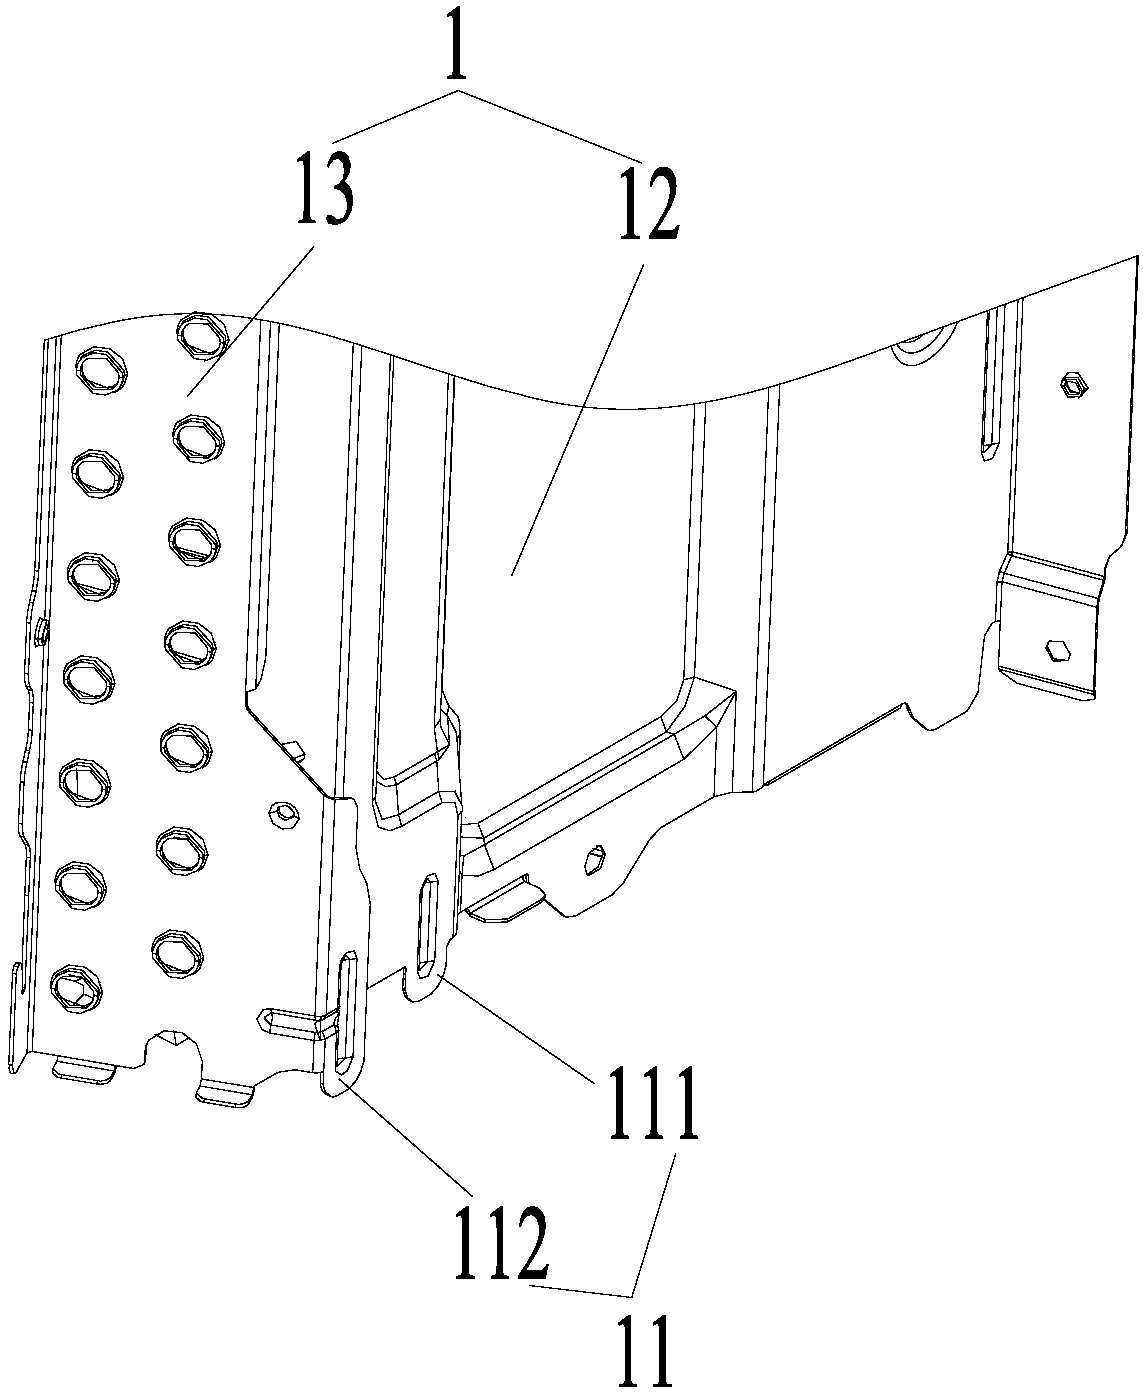 Connecting structure of metal plate piece, outdoor unit and air conditioner